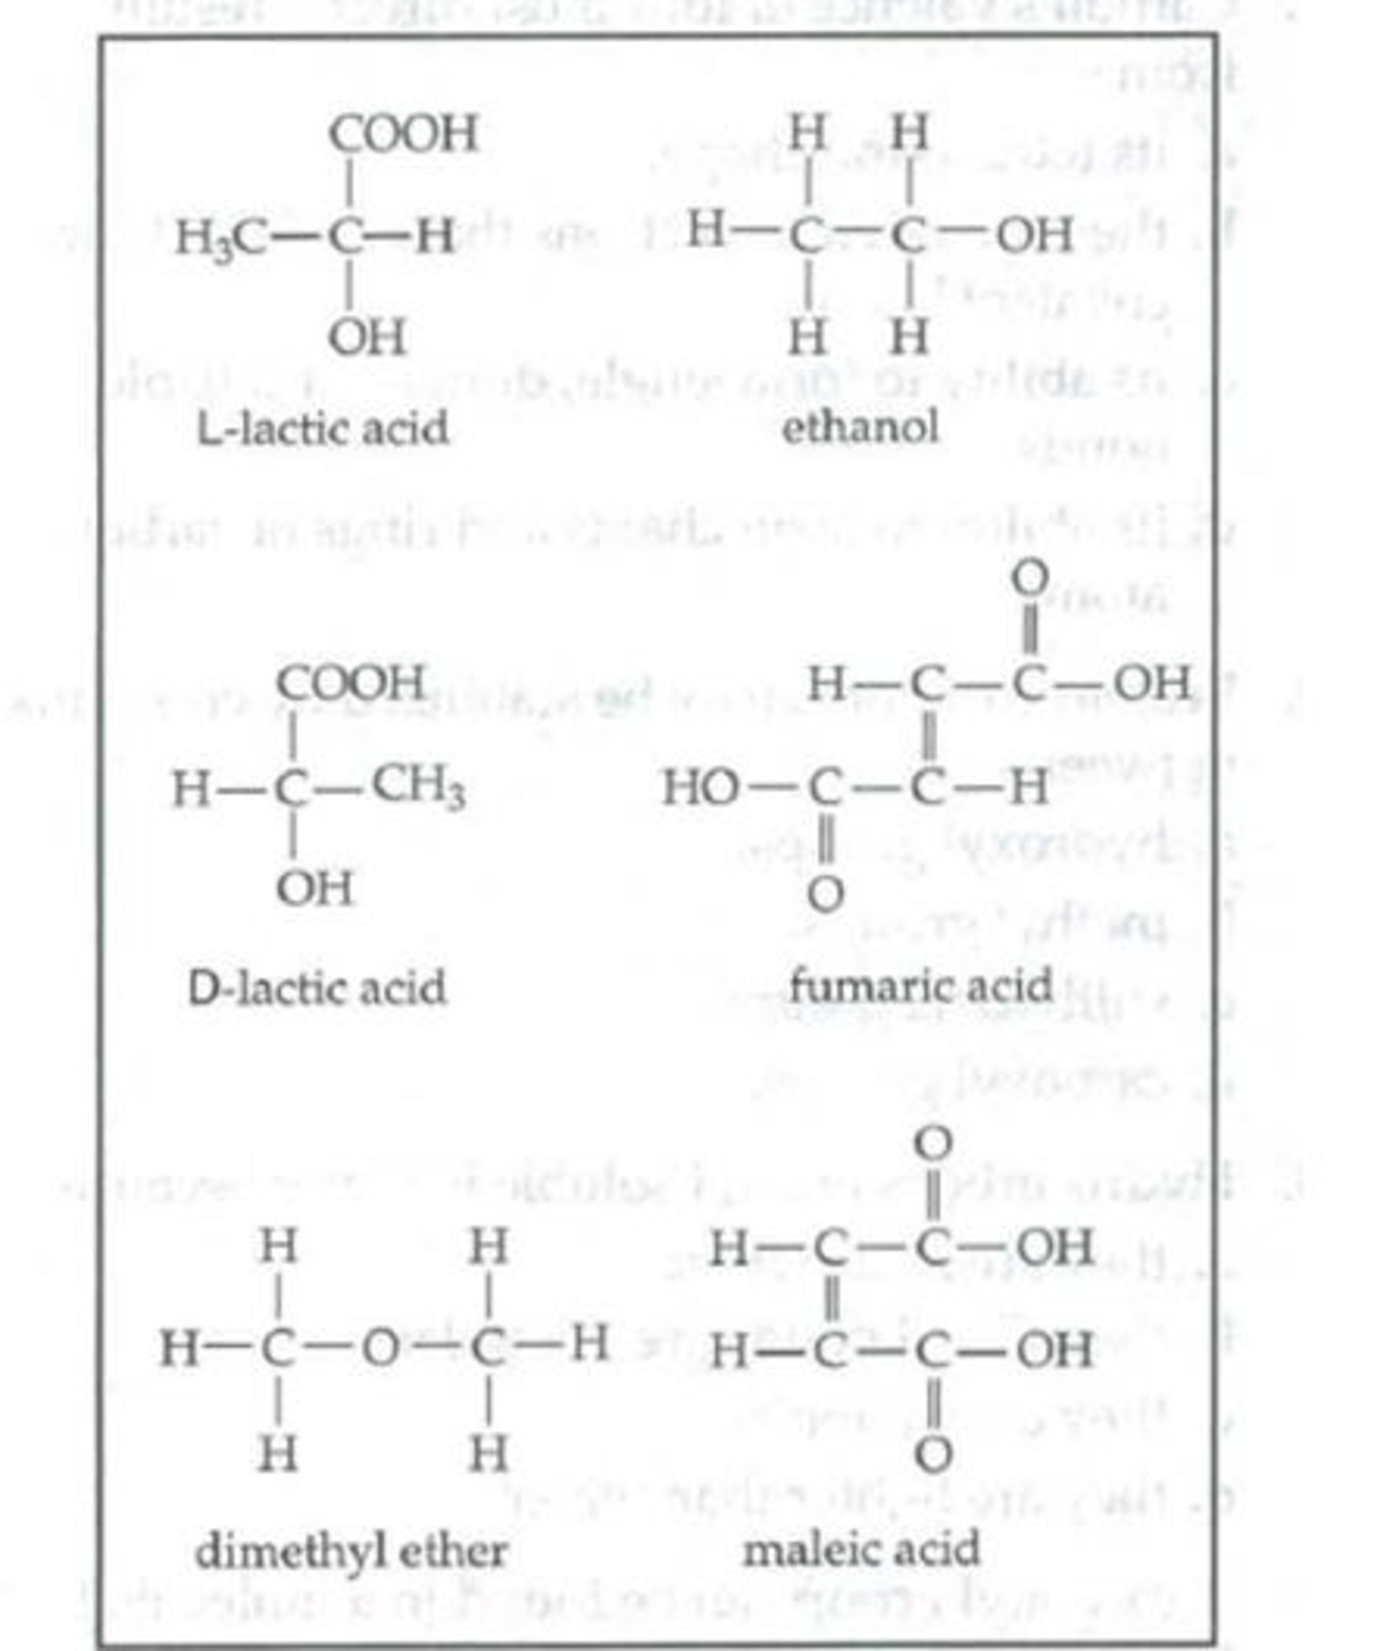 Chapter 4, Problem 2IQ, Define structural isomers, cis-trans isomers, and enantiomers, and then identify the pairs of 